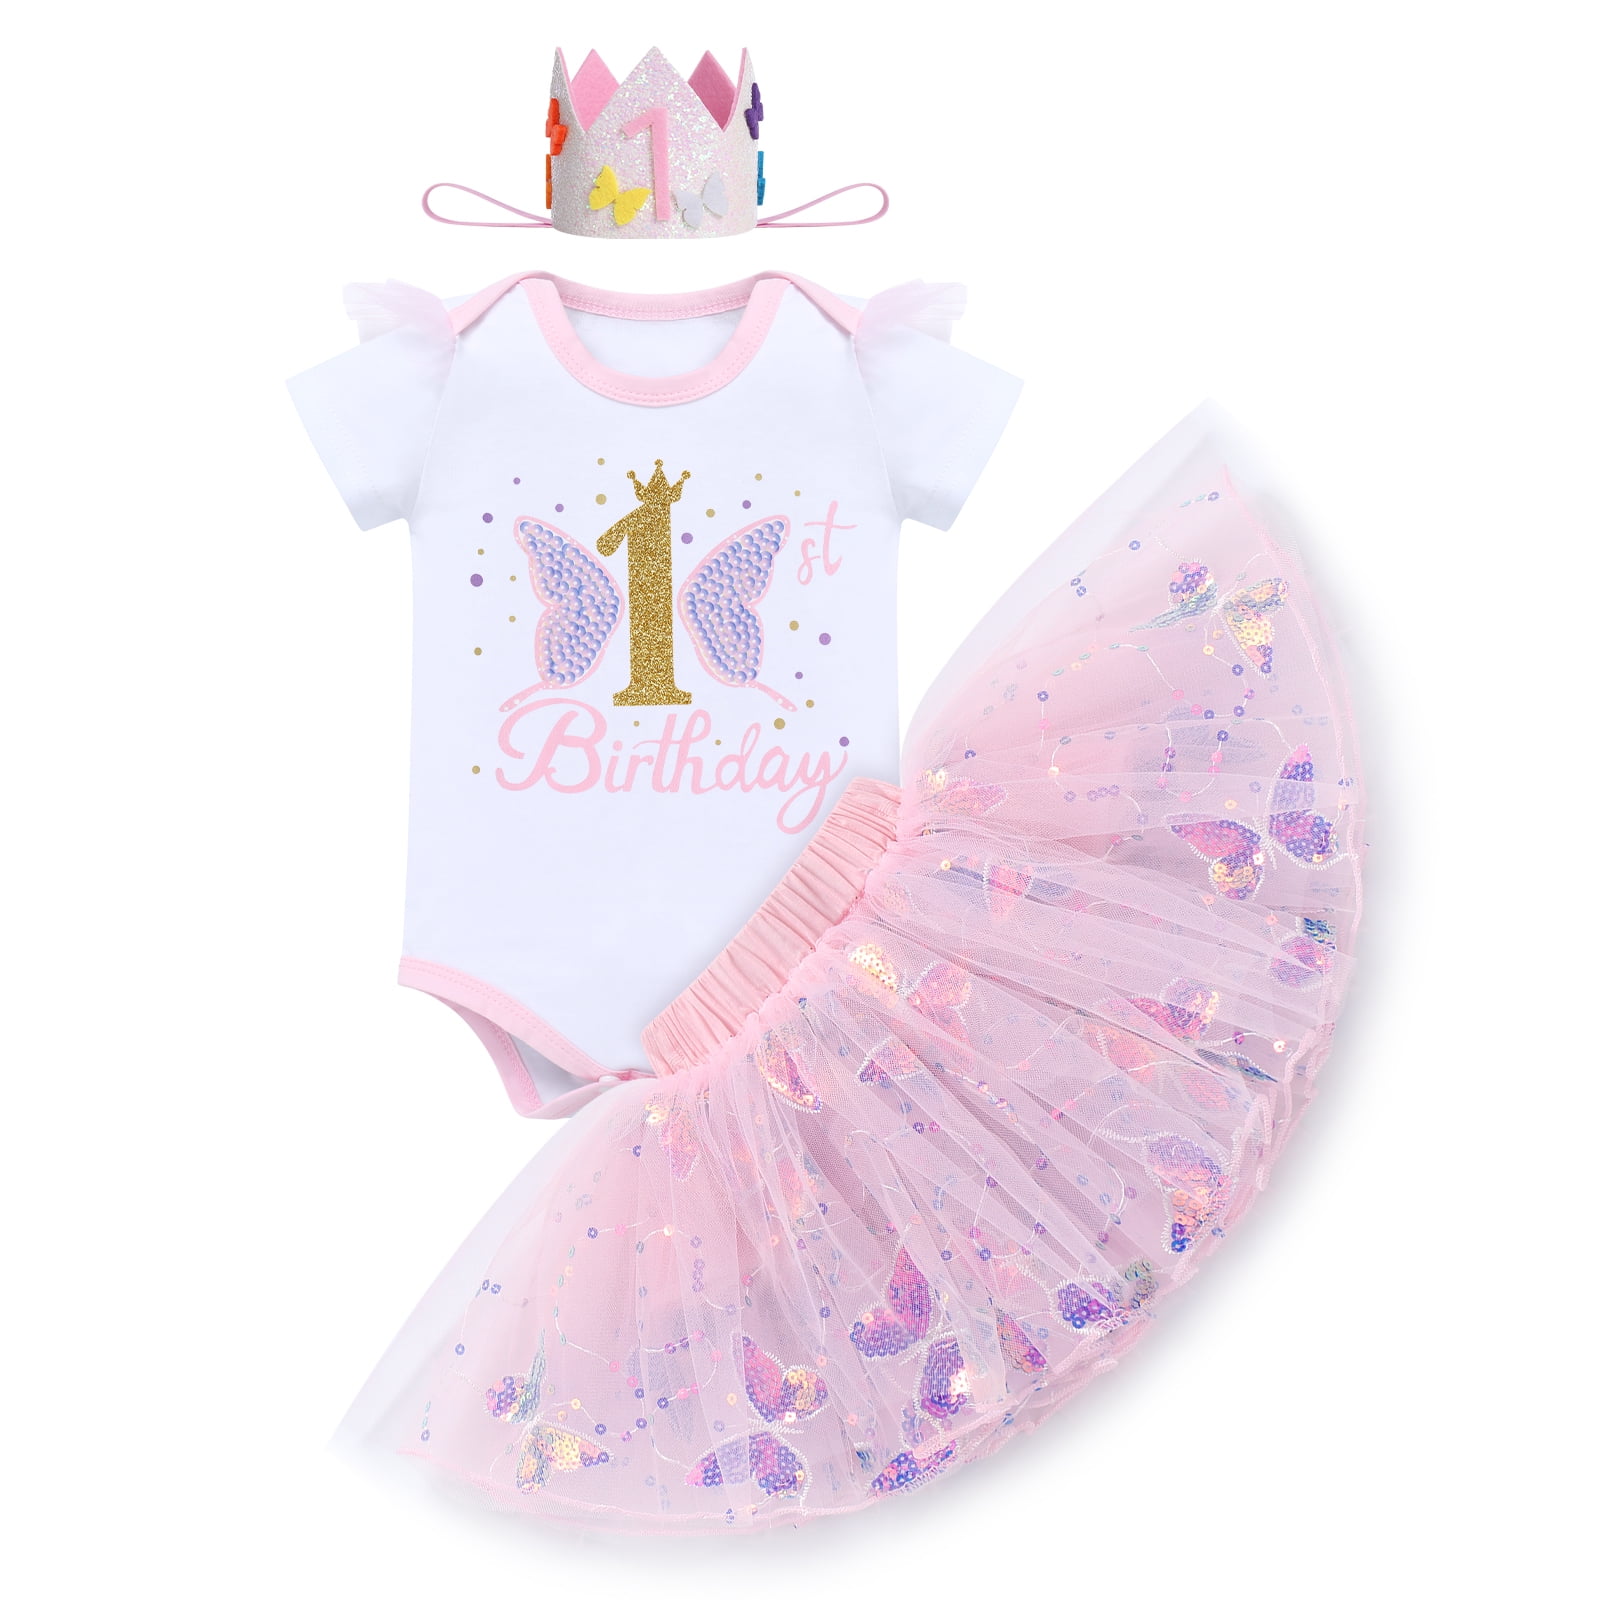 IBTOM CASTLE Baby Girl 1st Birthday Outfit Sequin Butterfly Romper Tutu ...